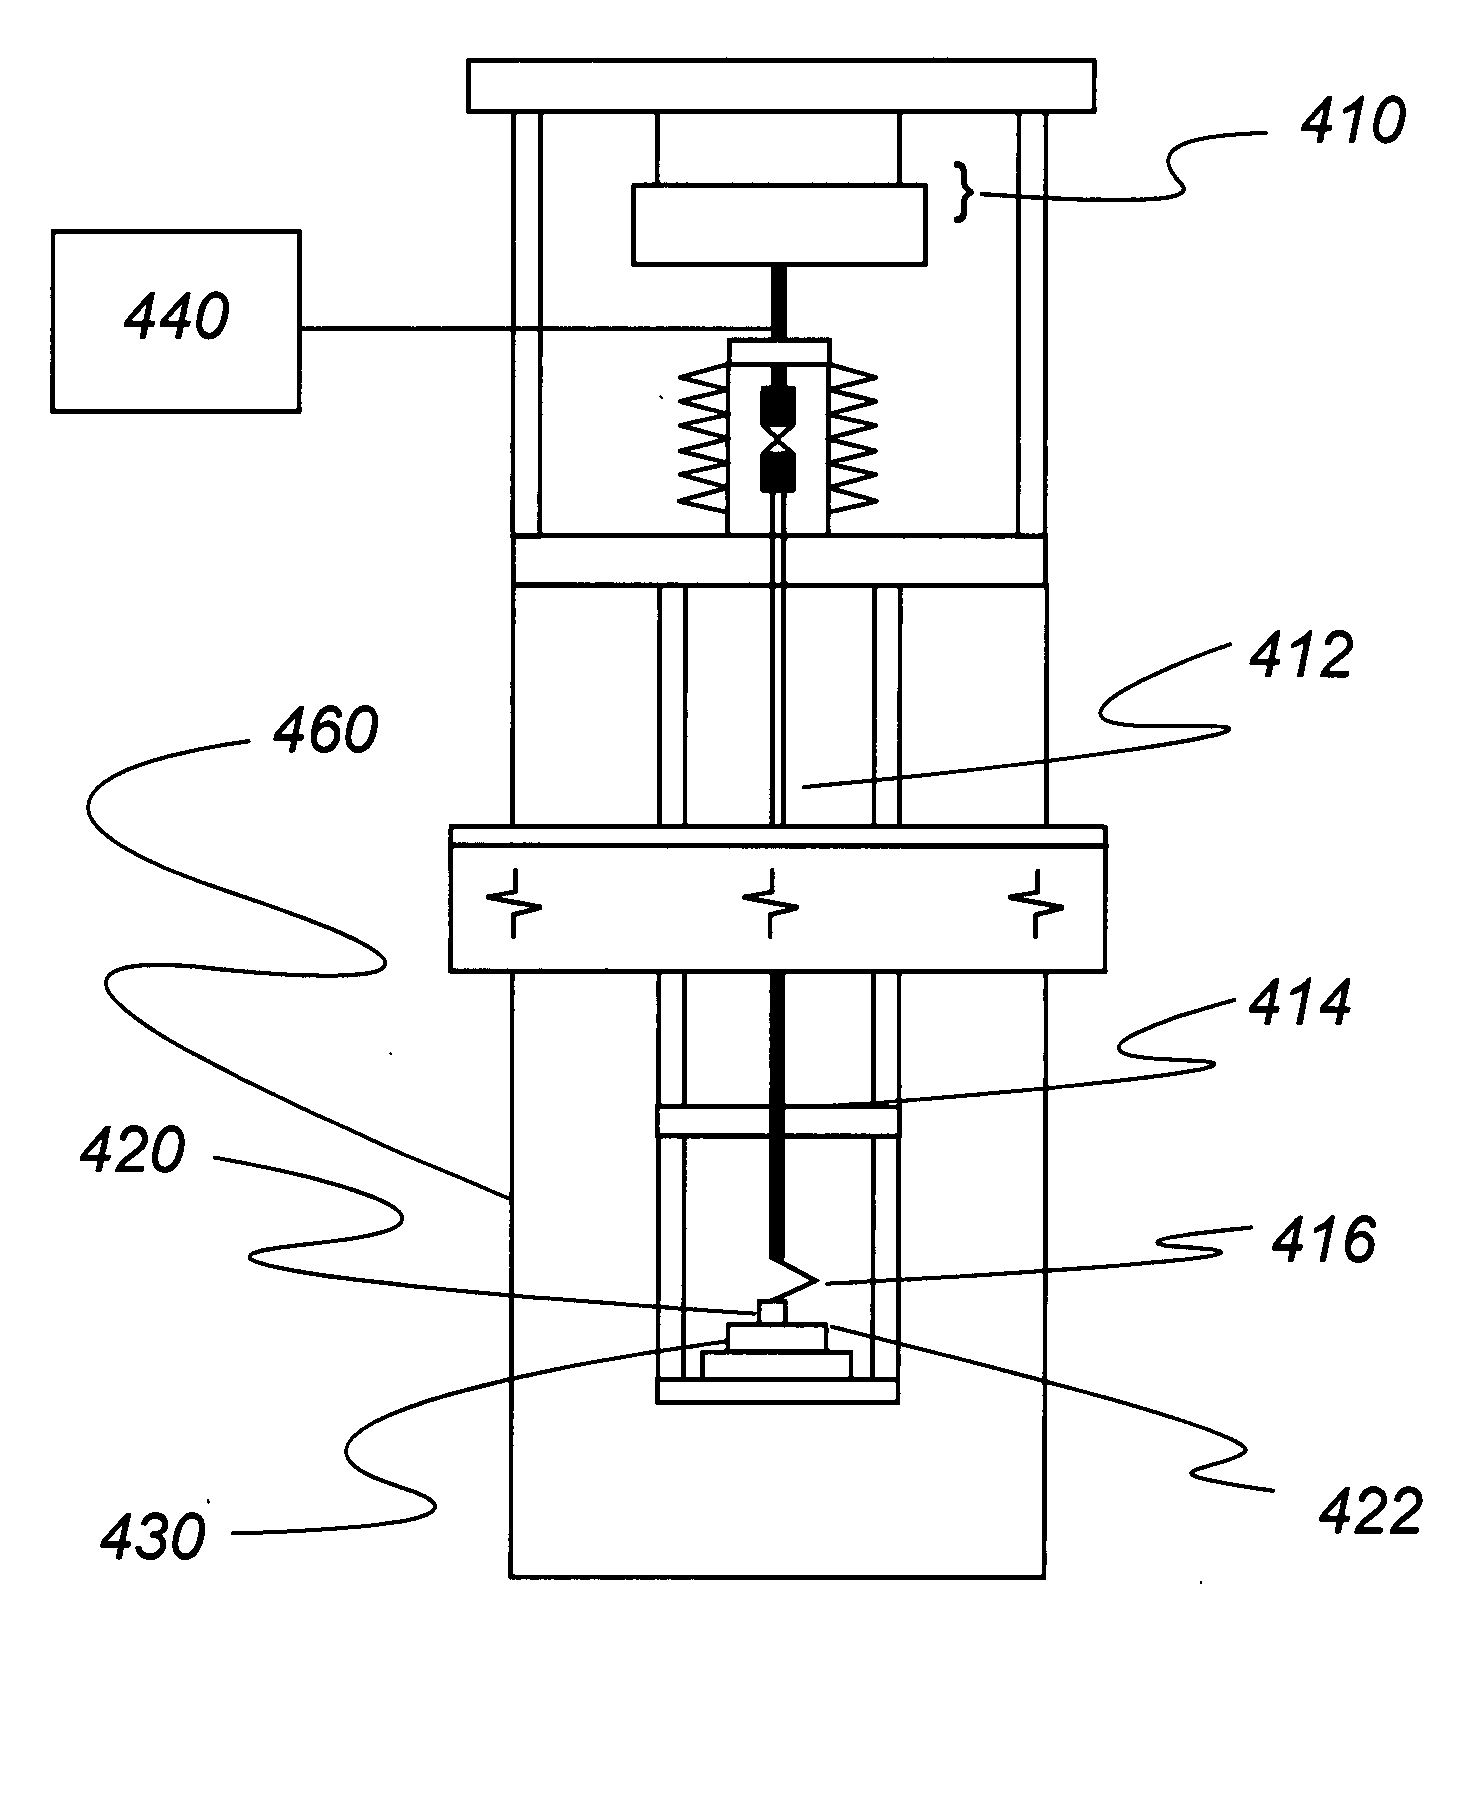 Method and apparatus for measuring current density in conductive materials